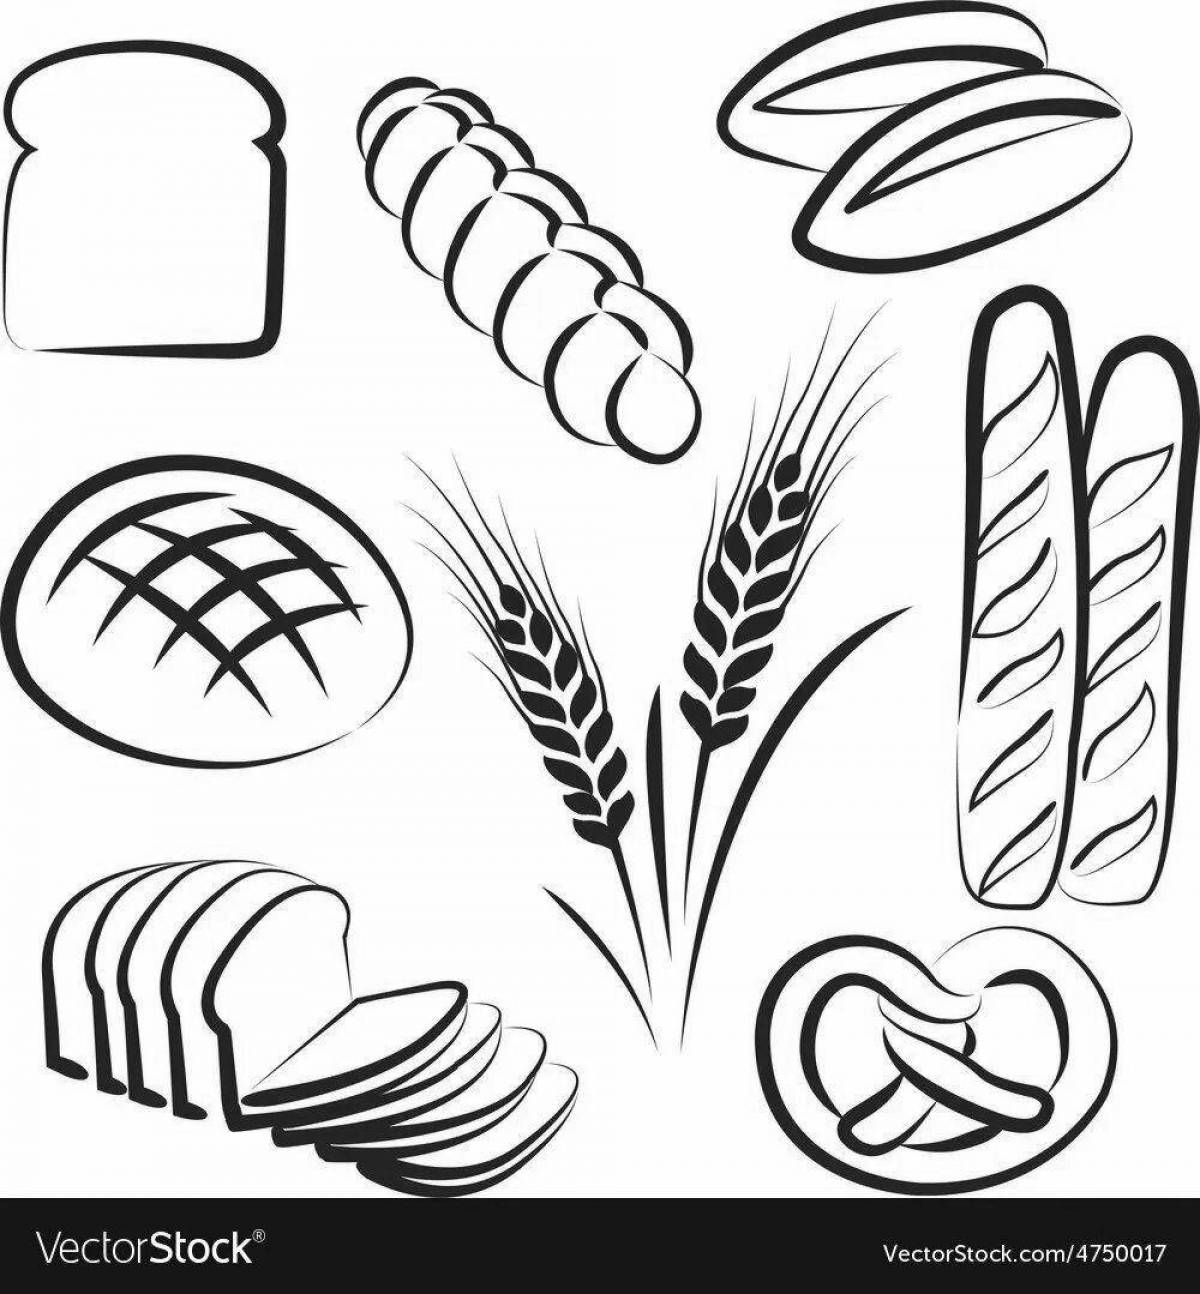 Playful preschool bakery coloring page